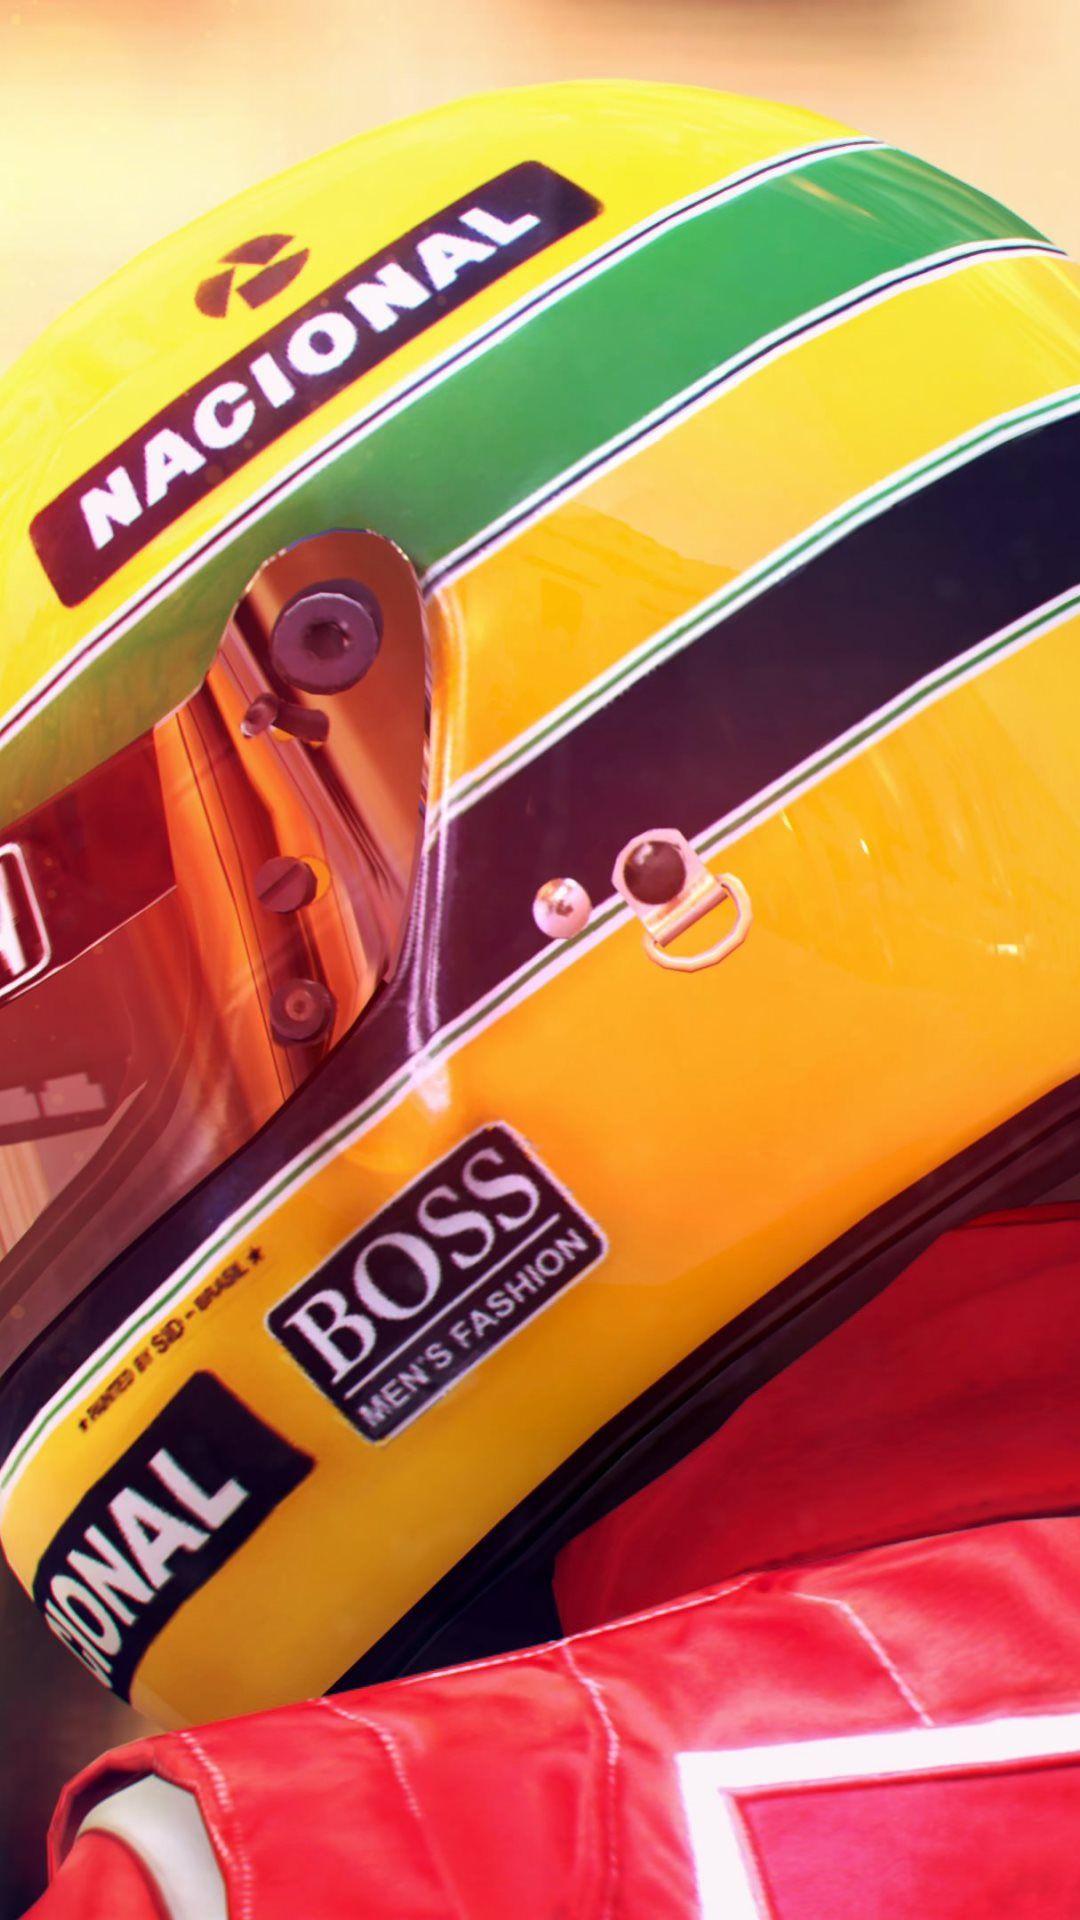 Tribute to Ayrton Senna in Gran Turismo 6 Wallpapers HD Backgrounds